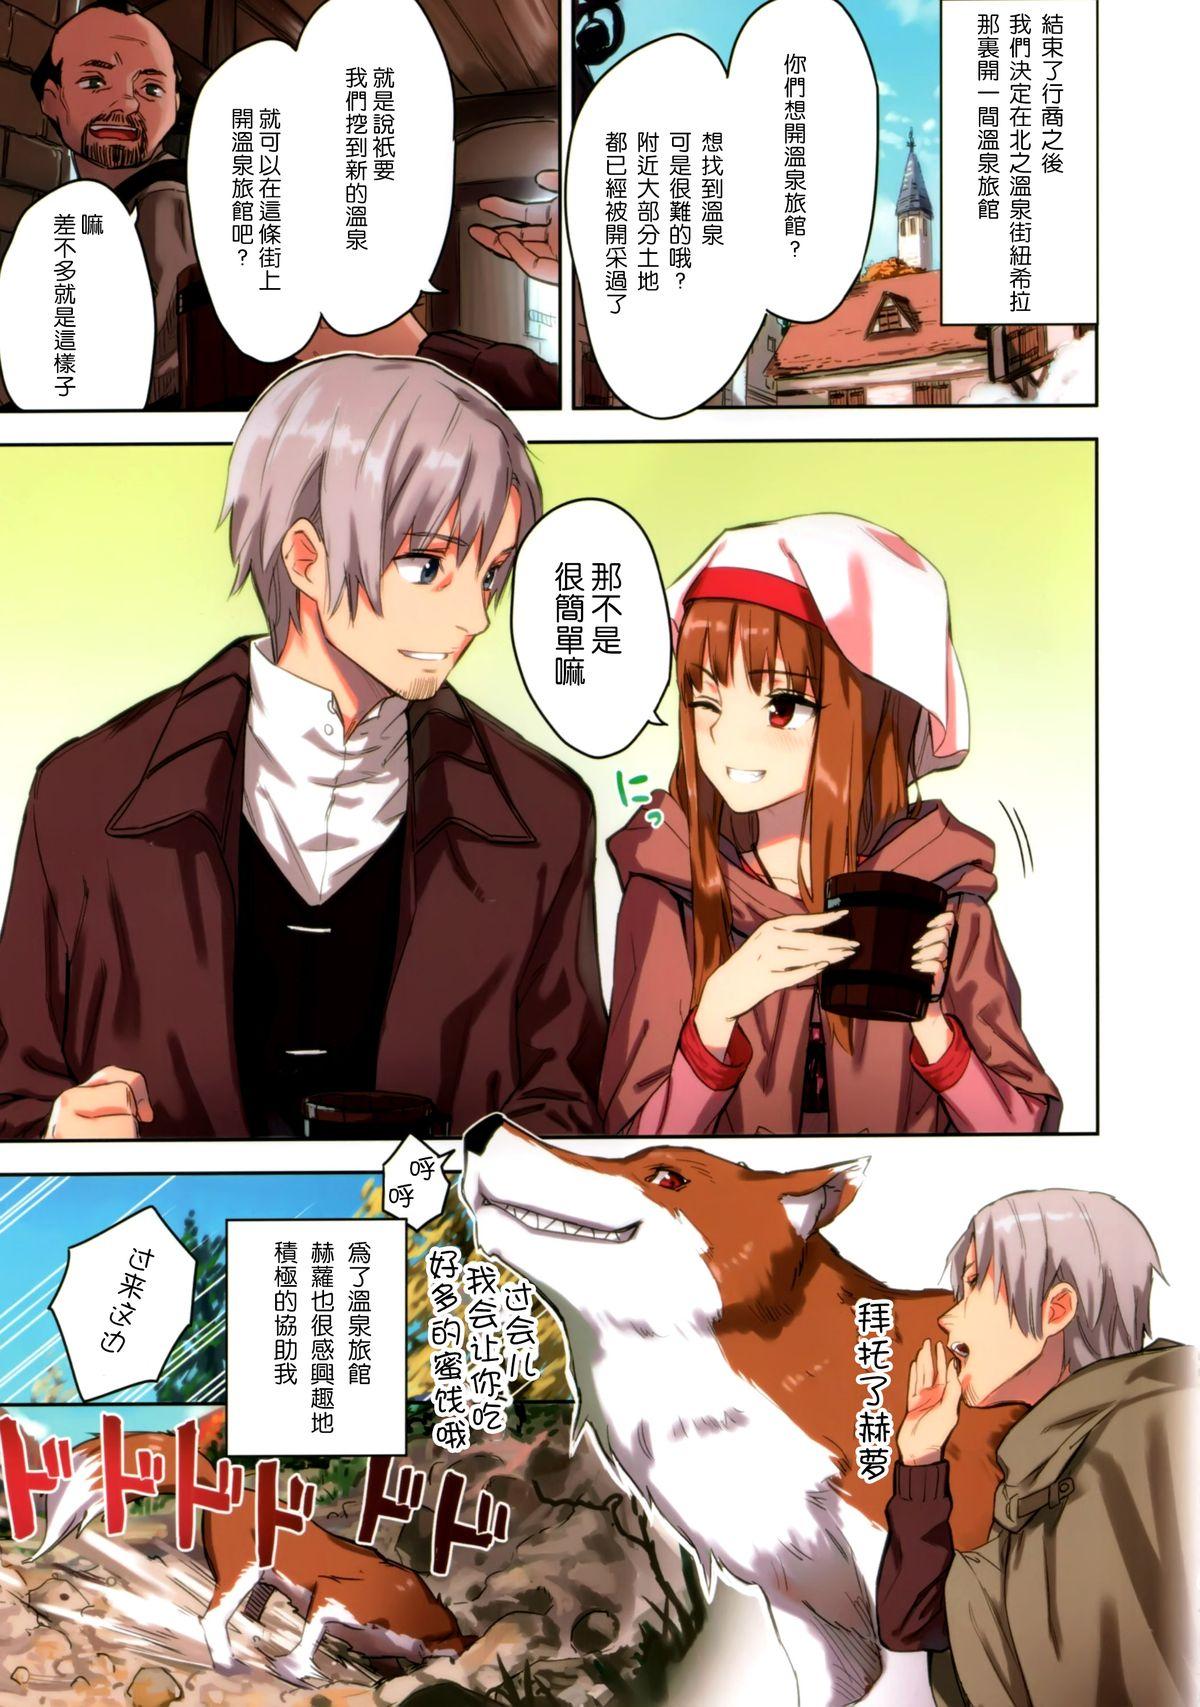 Cavala Wacchi to Nyohhira Bon FULL COLOR - Spice and wolf Cougar - Page 6